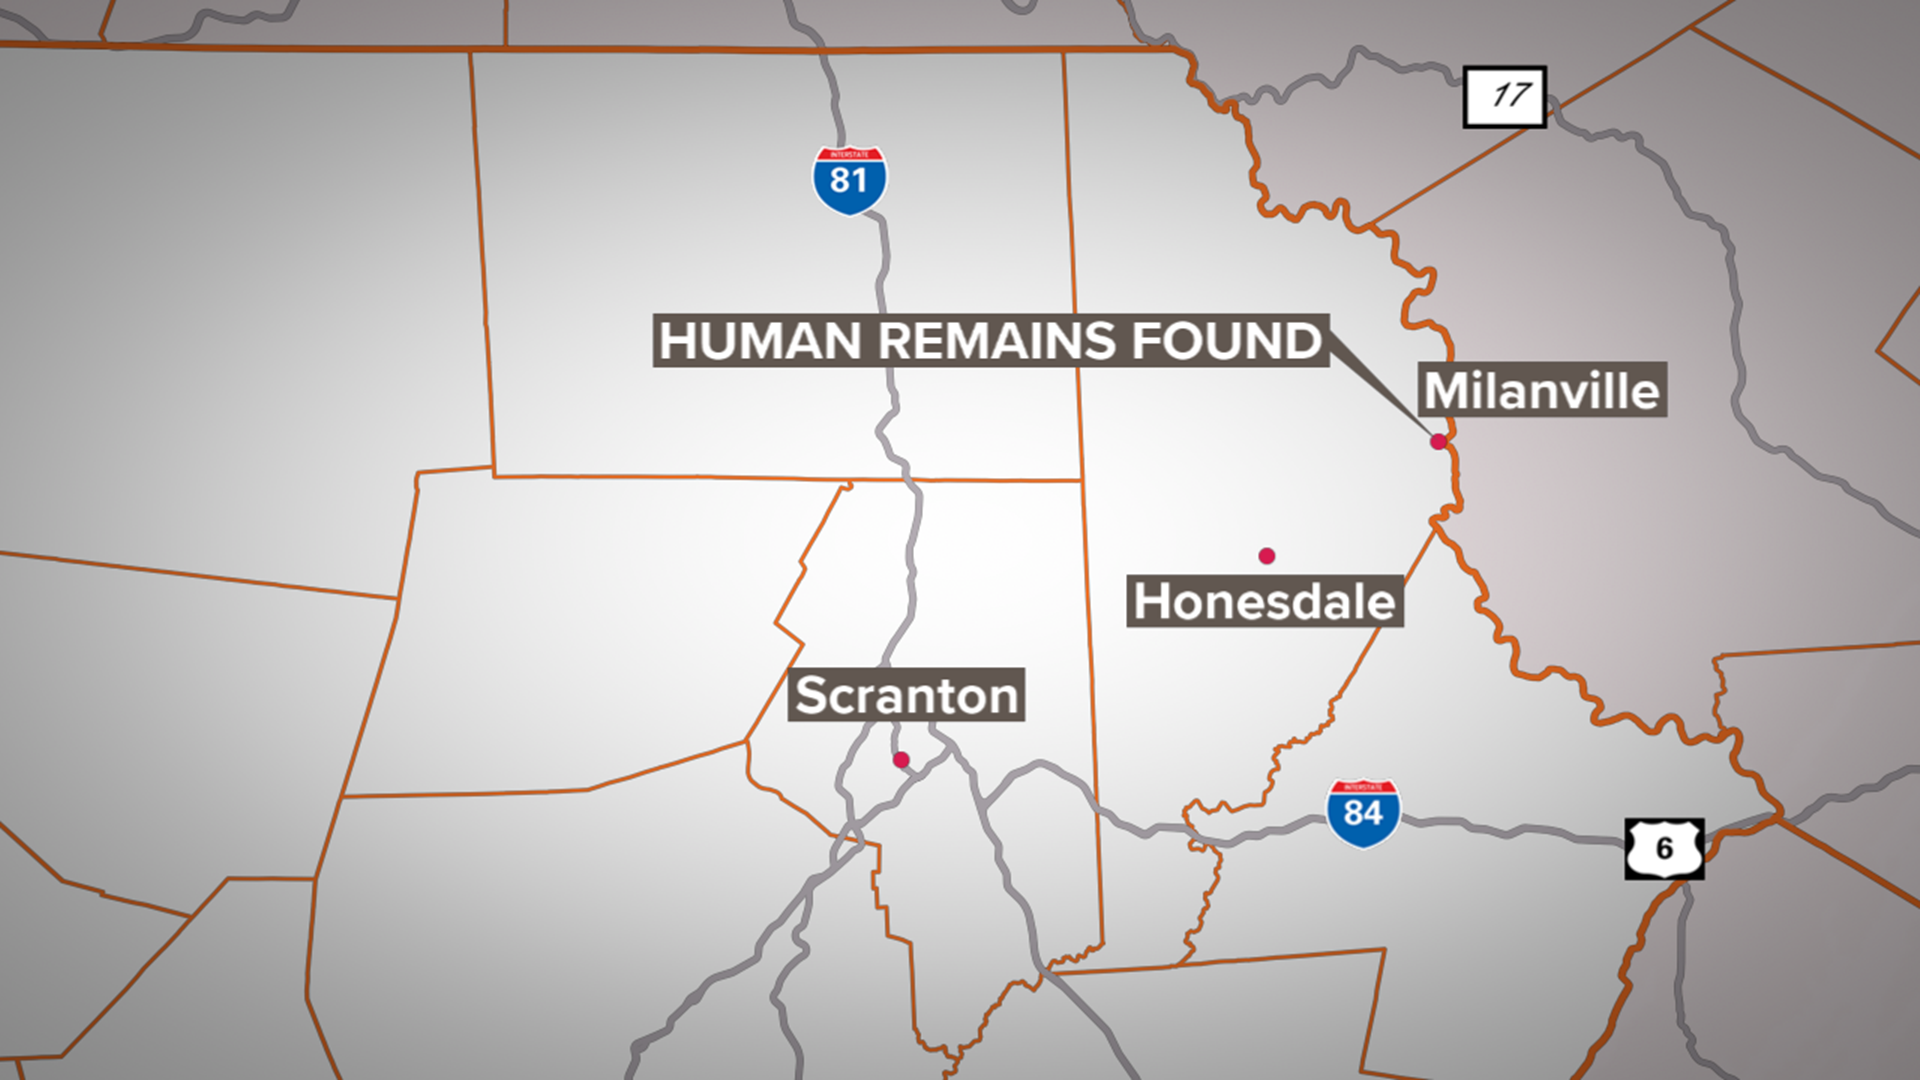 The bones were found Tuesday in Damascus Township.